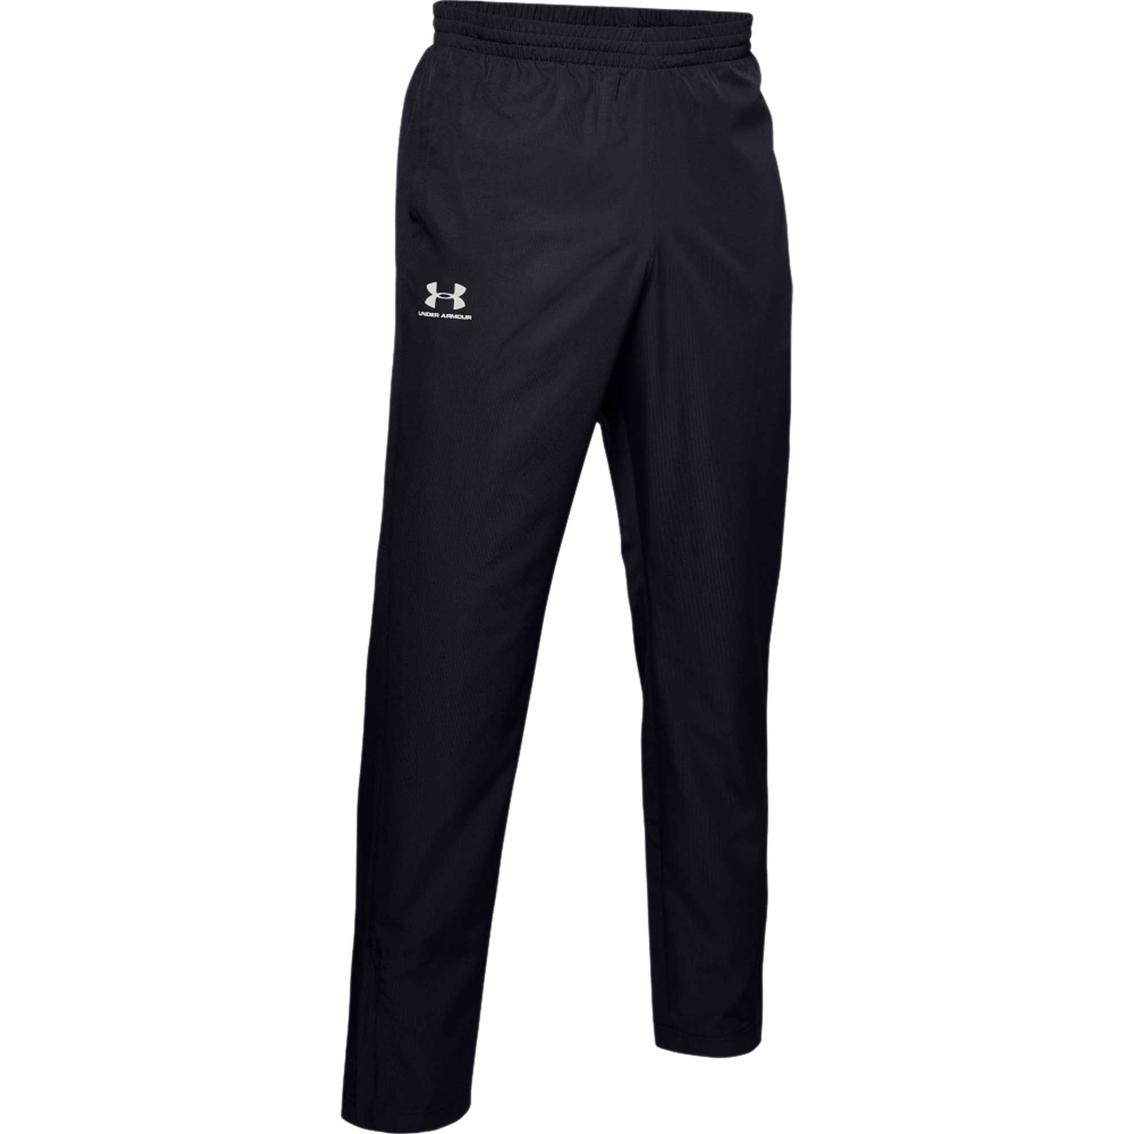 Under Armour Vital Woven Pants - Image 5 of 6